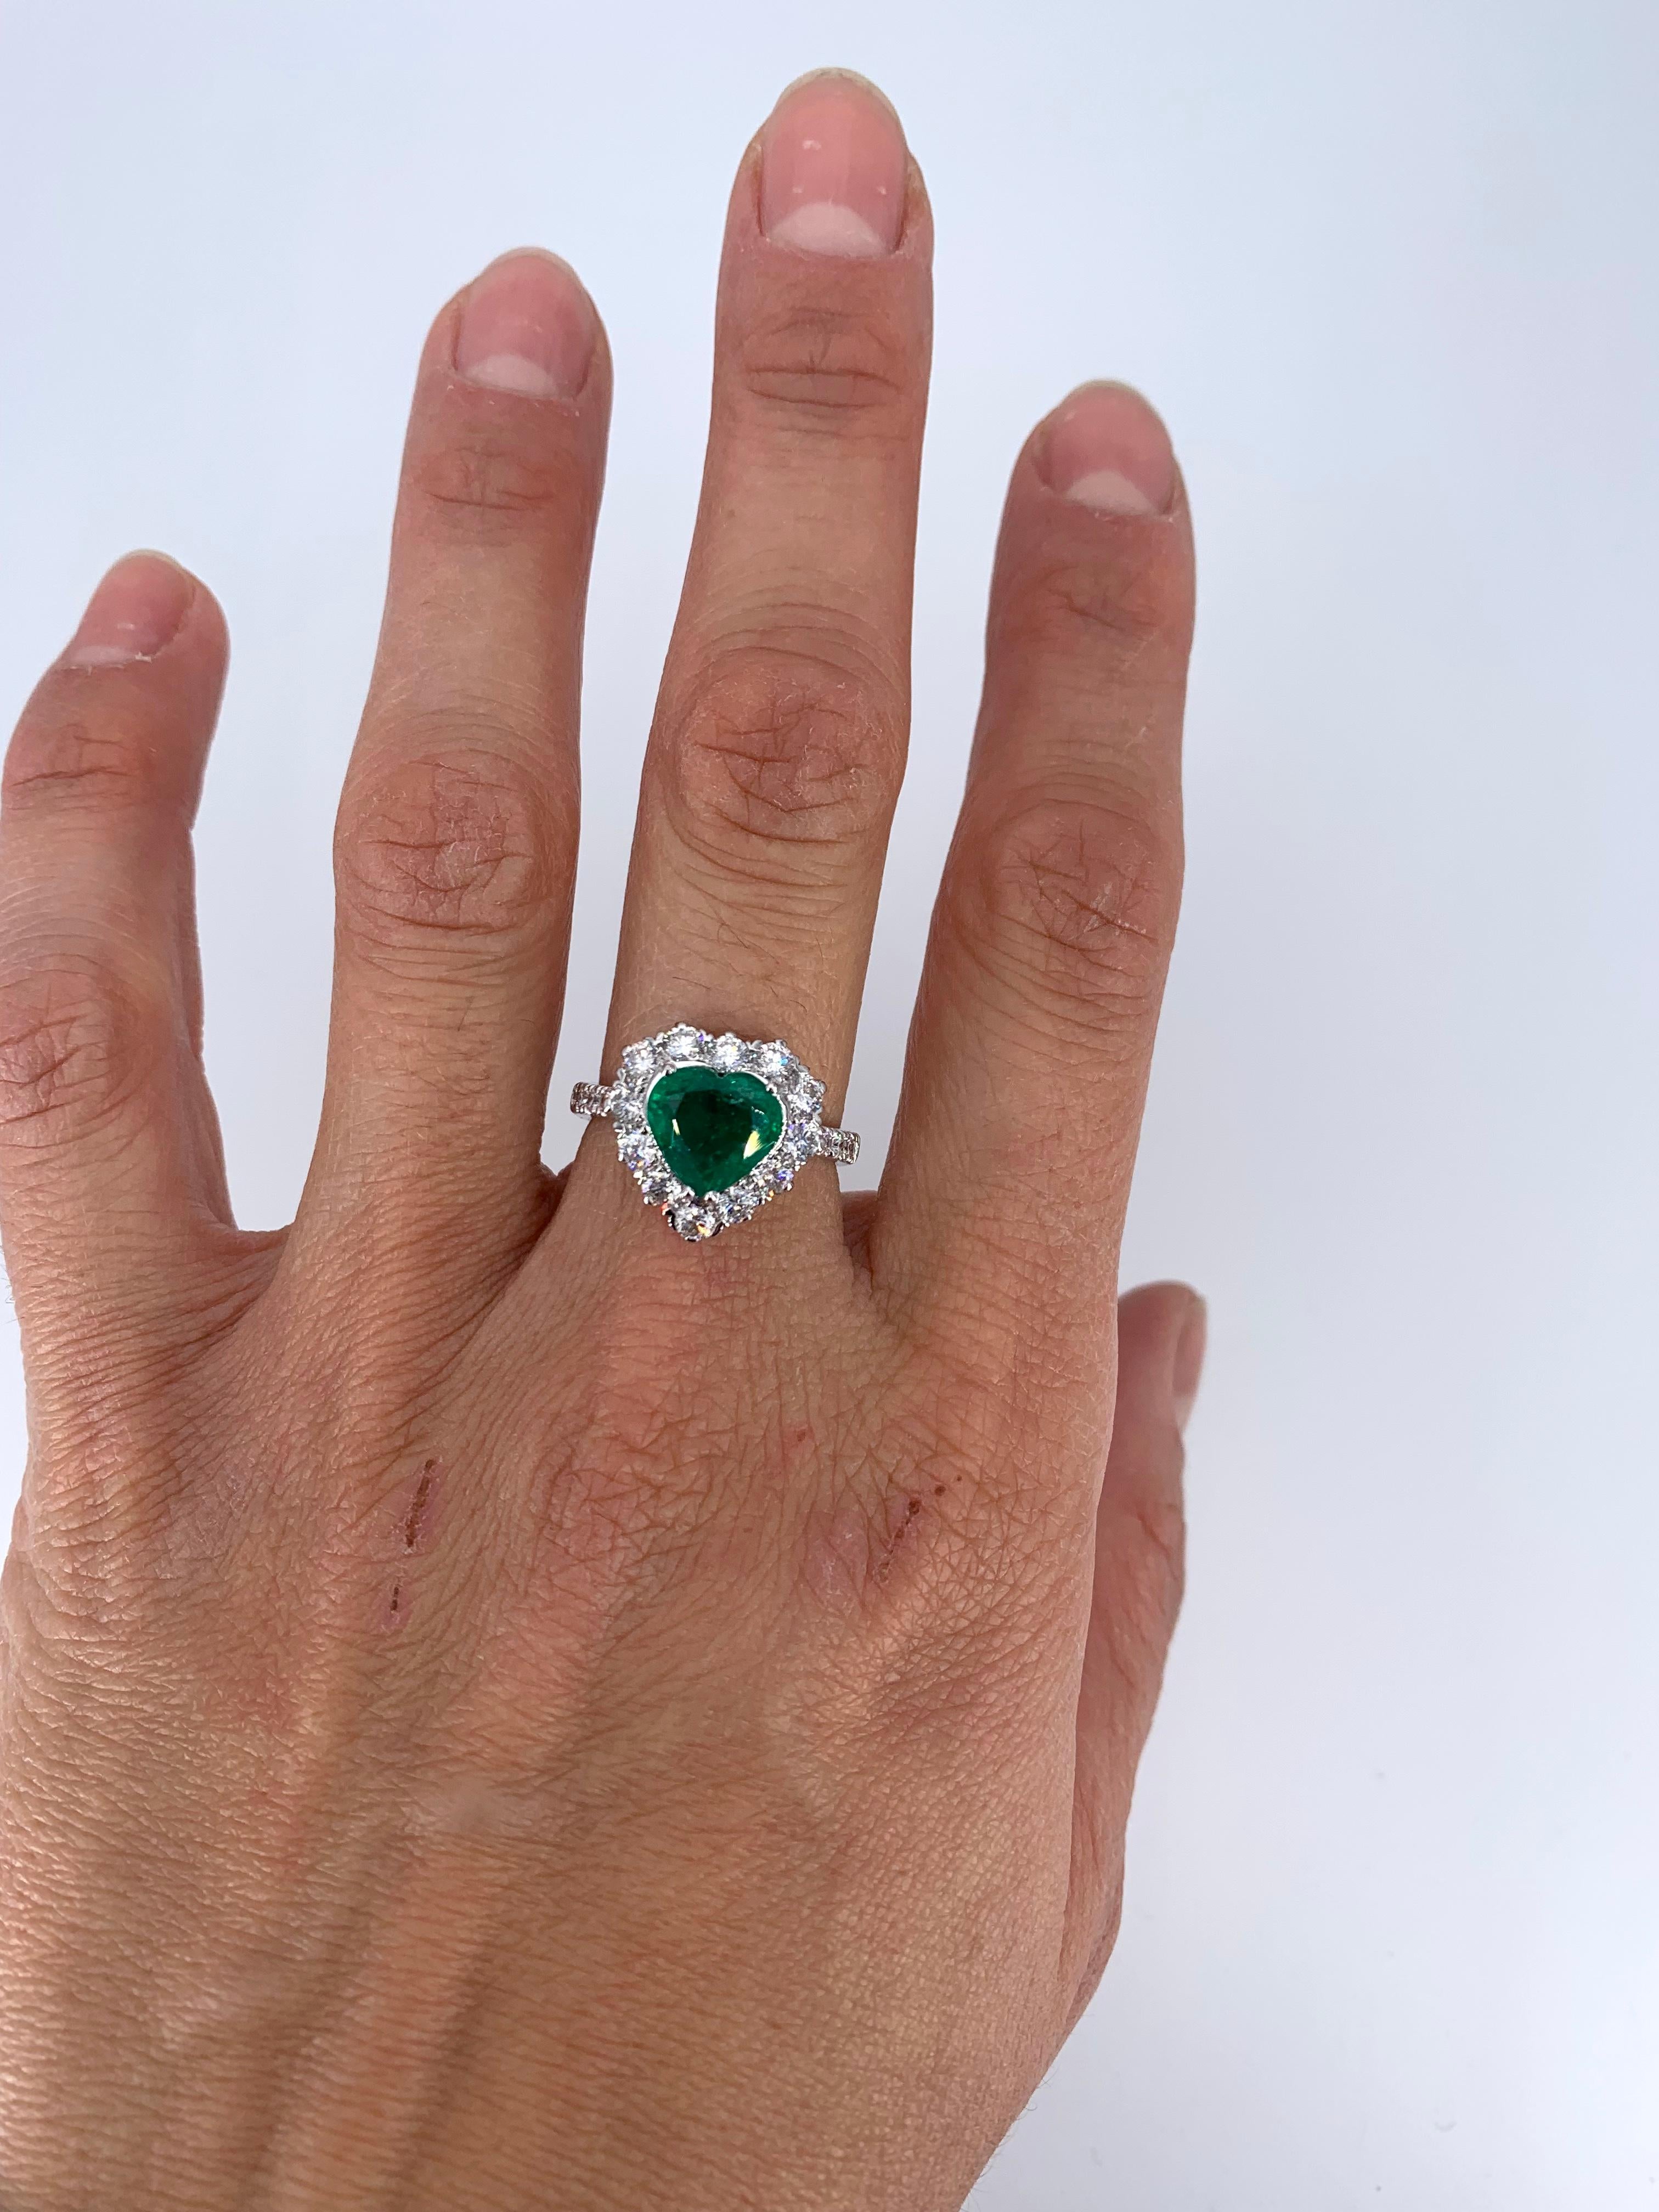 Contemporary 7.32 Carat Emerald & 3.75 Carat Diamond Heart Shaped Ring For Sale 2